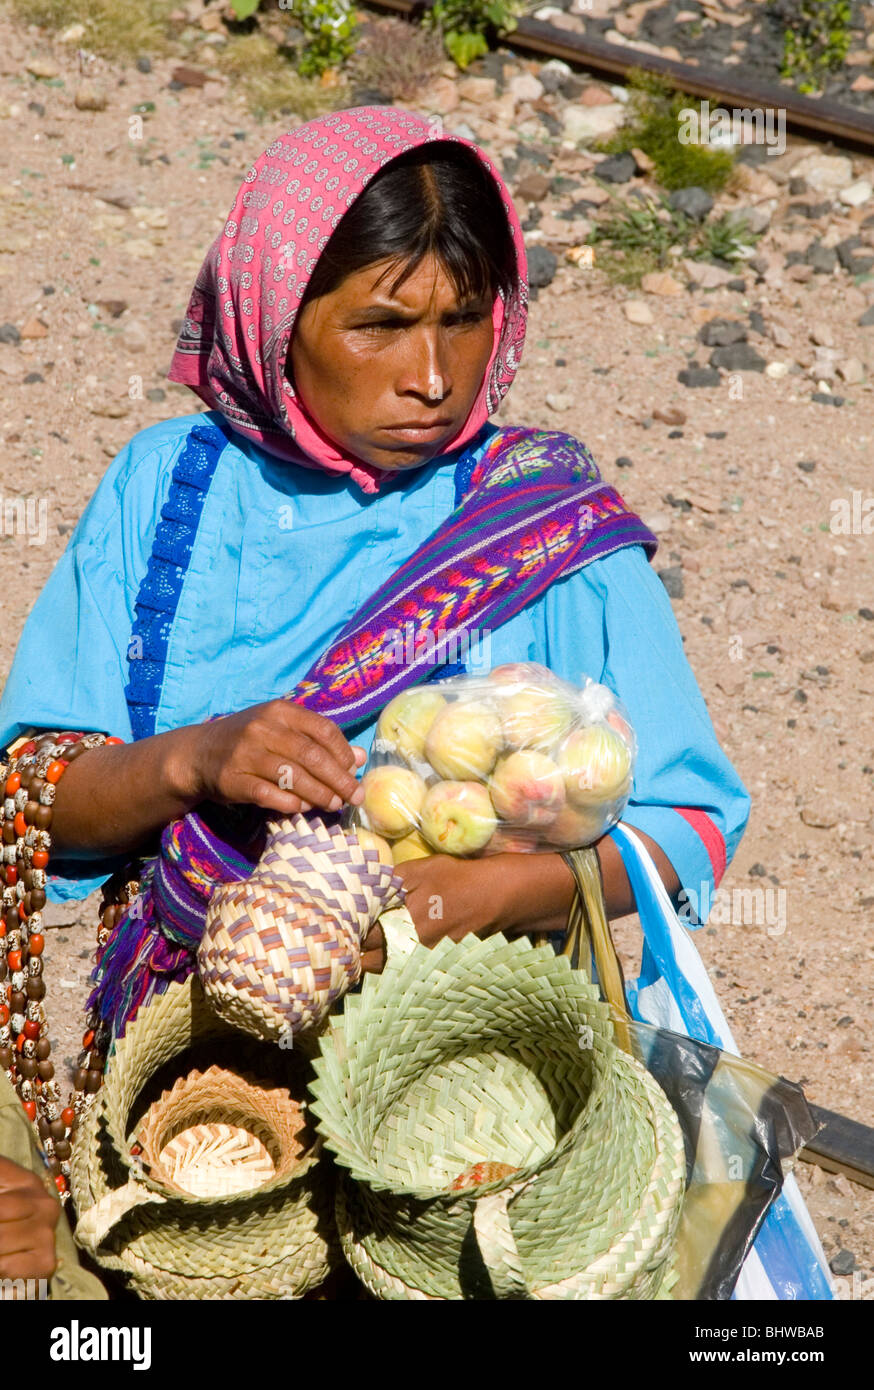 Copper Canyon Tarahumara woman sells woven baskets in Chihuahua State Mexico. Stock Photo